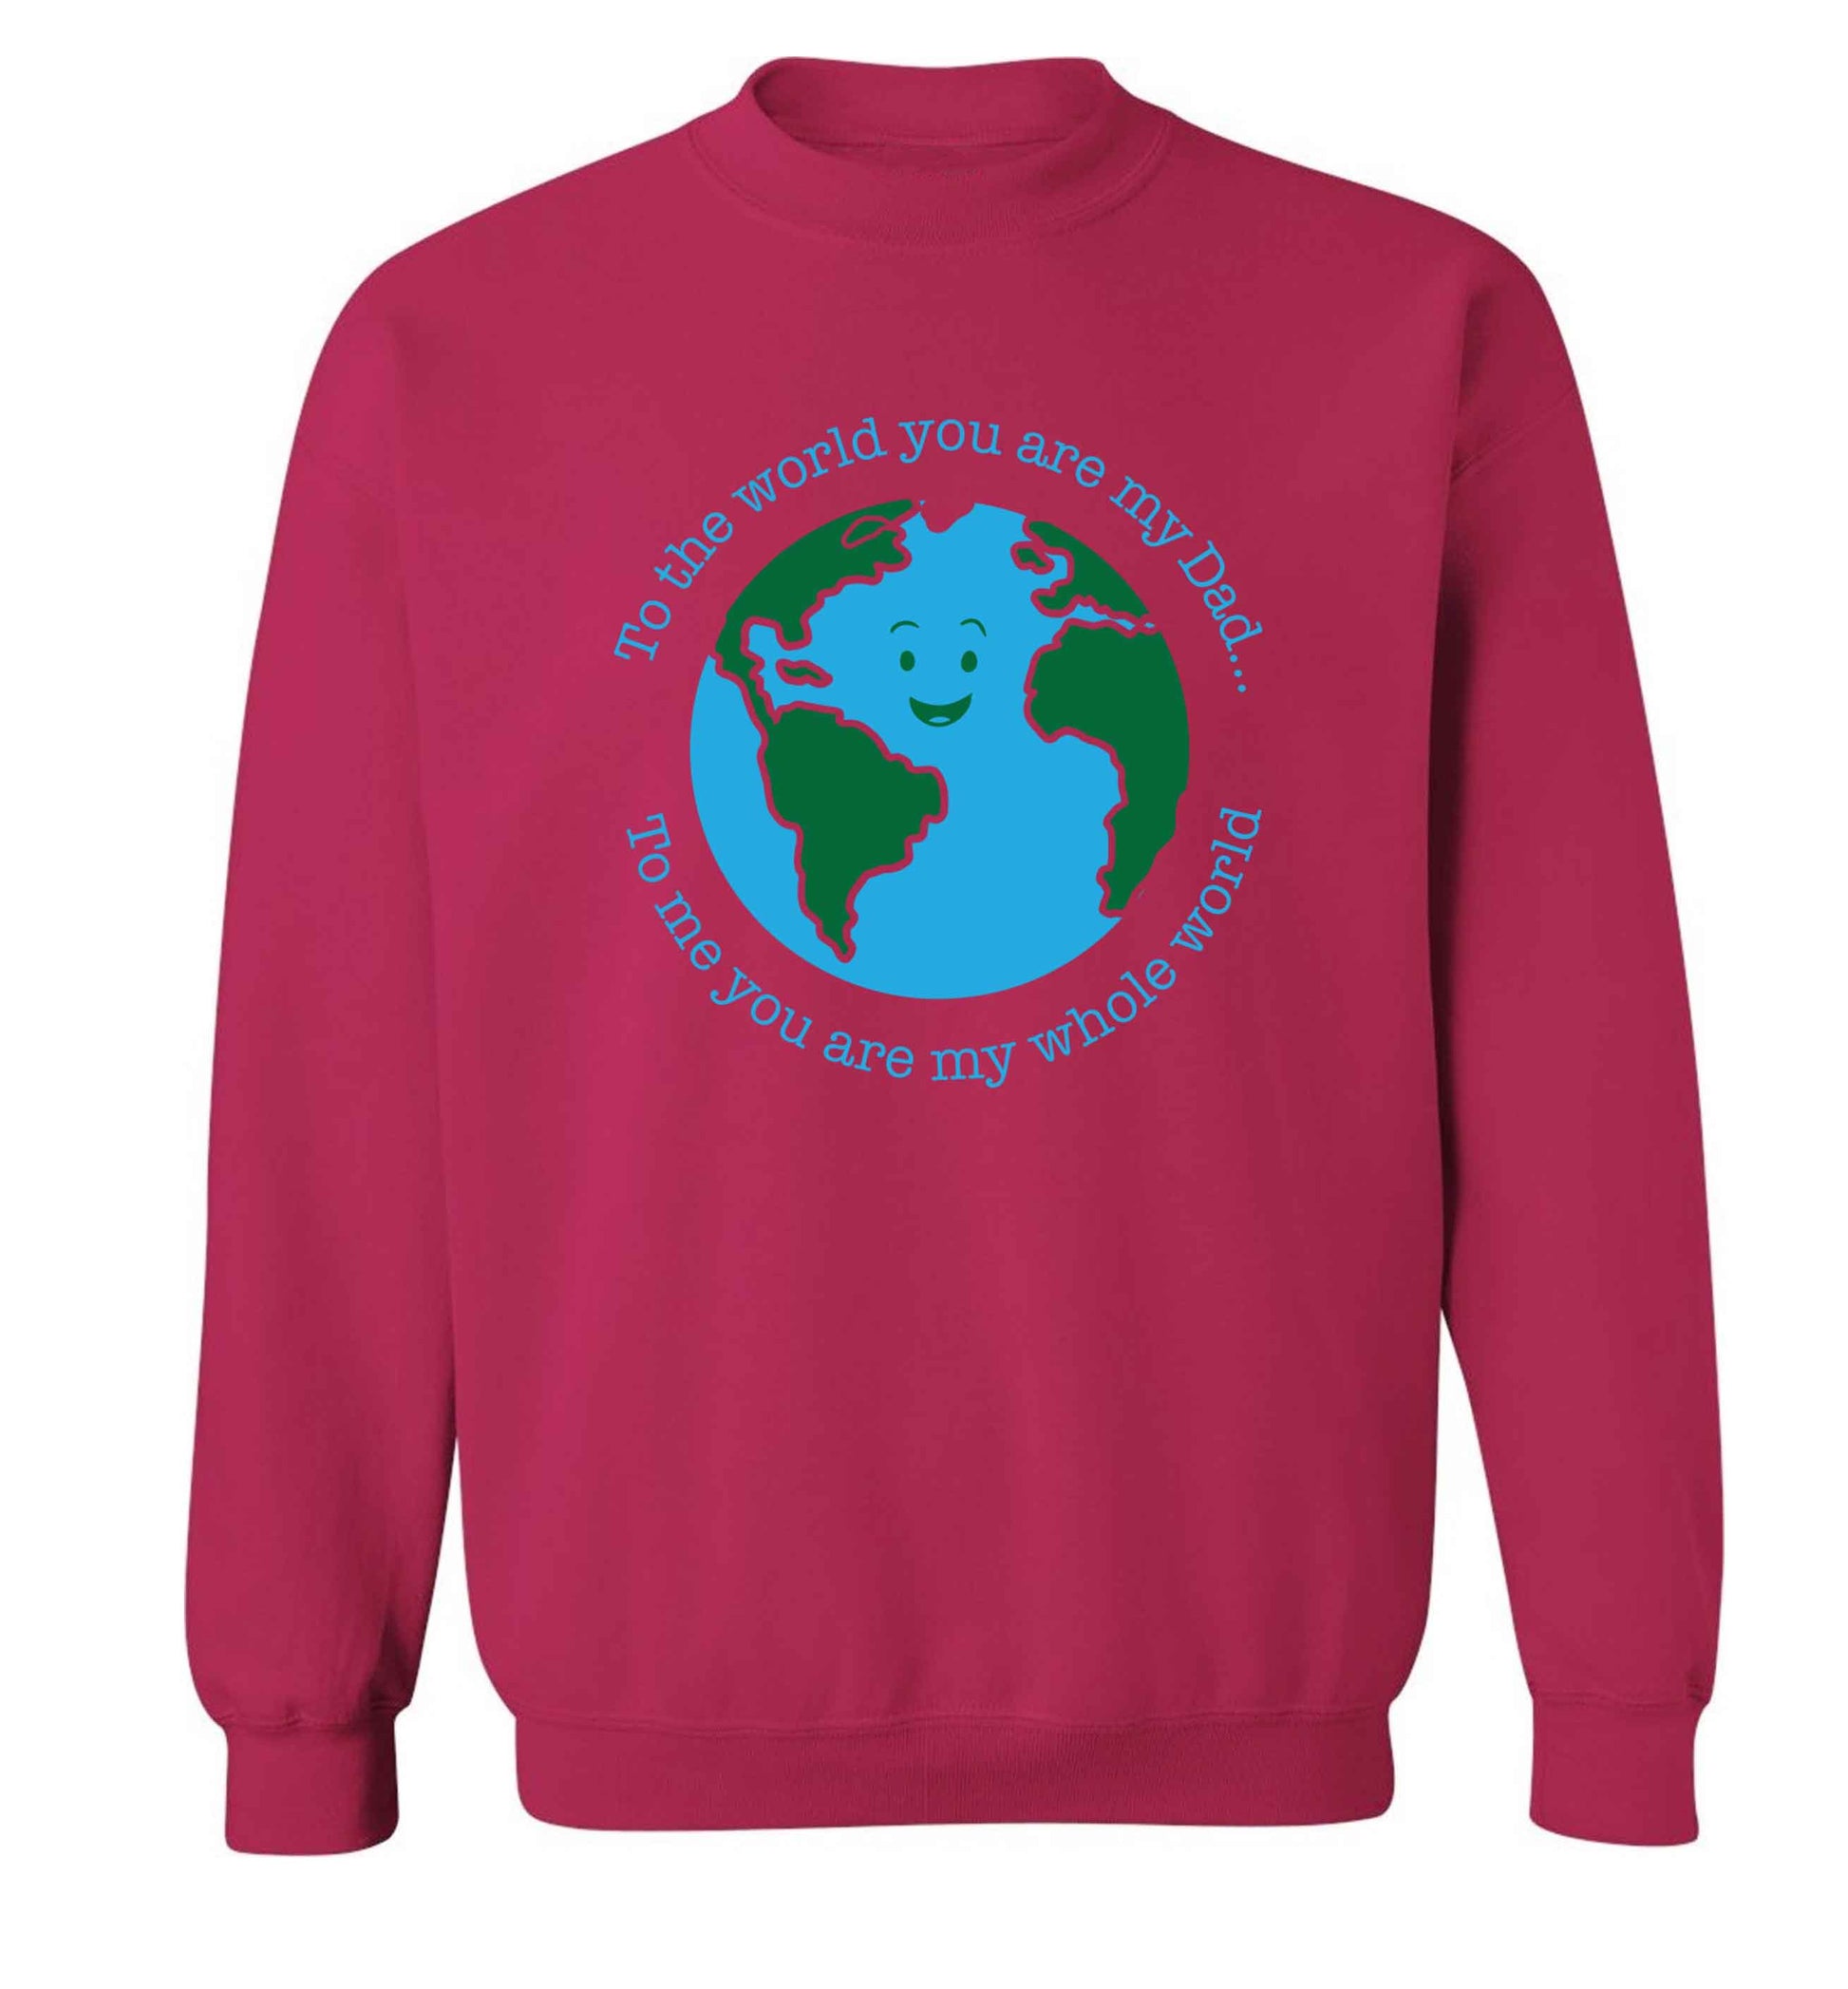 To the world you are my dad, to me you are my whole world adult's unisex pink sweater 2XL